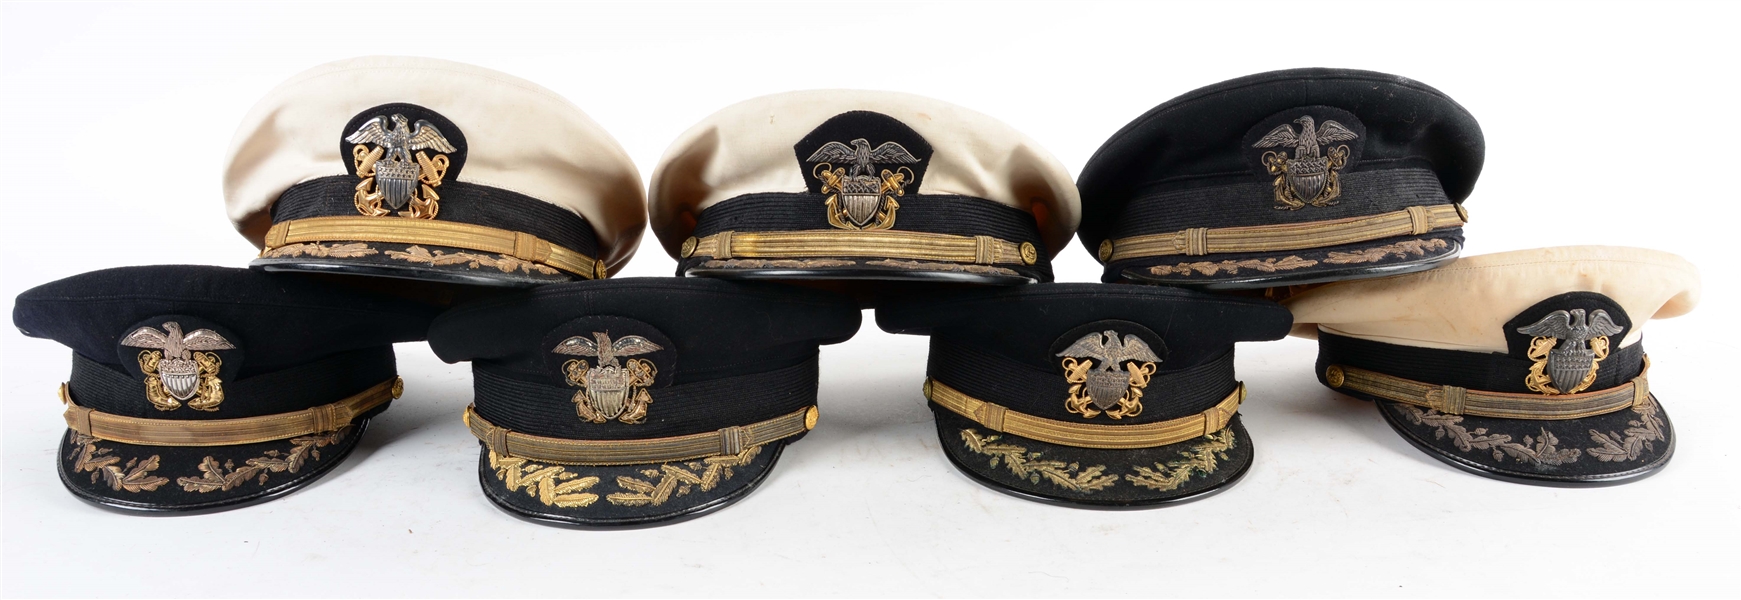 LOT OF 7: WWII PERIOD US NAVY COMMANDER & CAPTAIN OFFICERS CAPS. 